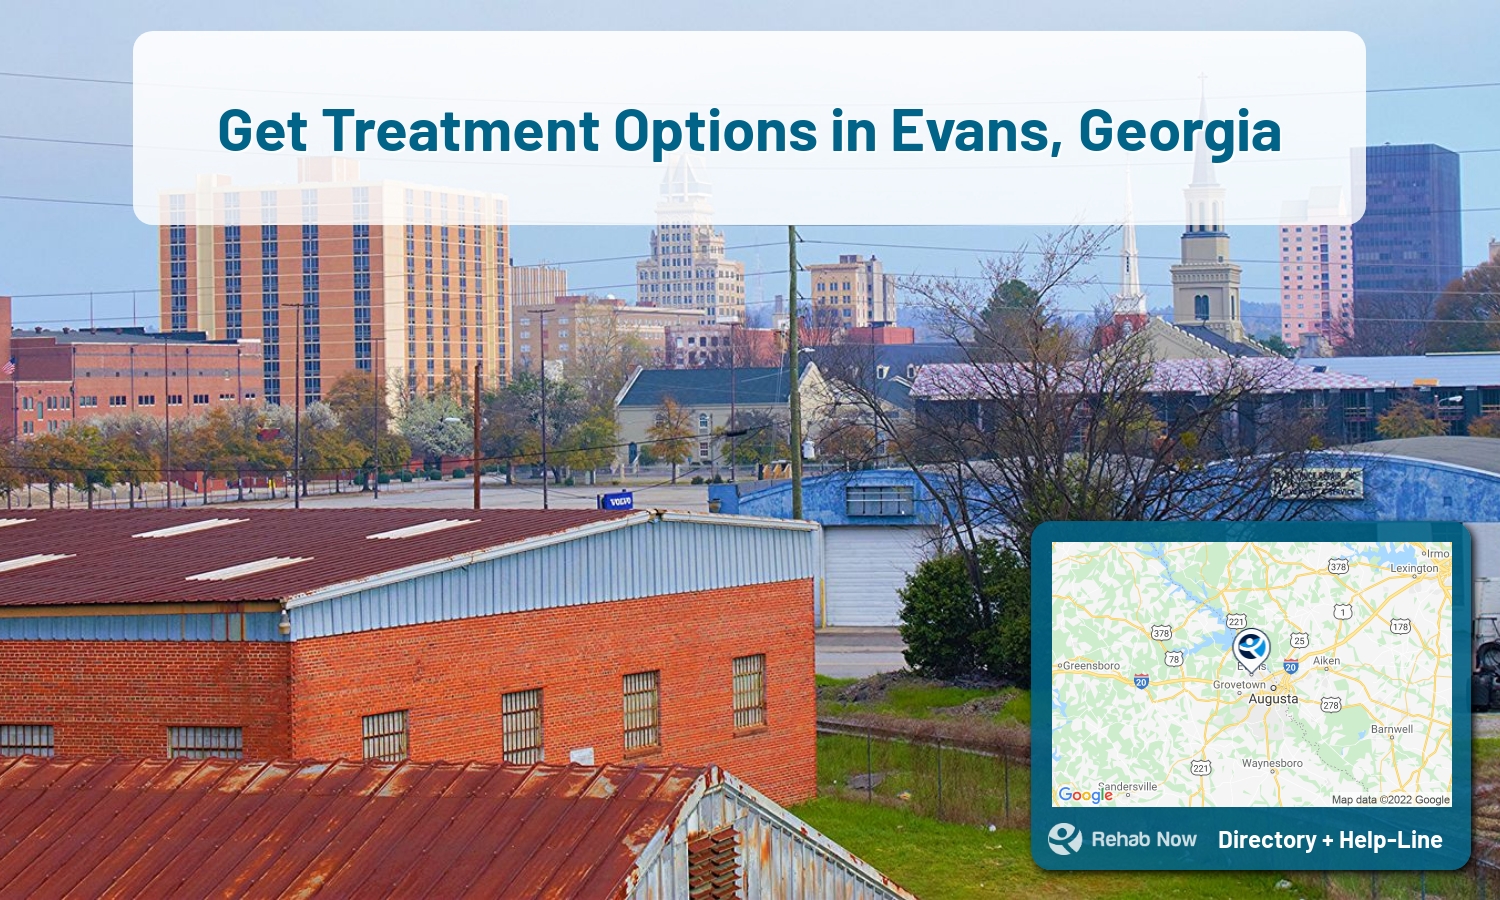 View options, availability, treatment methods, and more, for drug rehab and alcohol treatment in Evans, Georgia